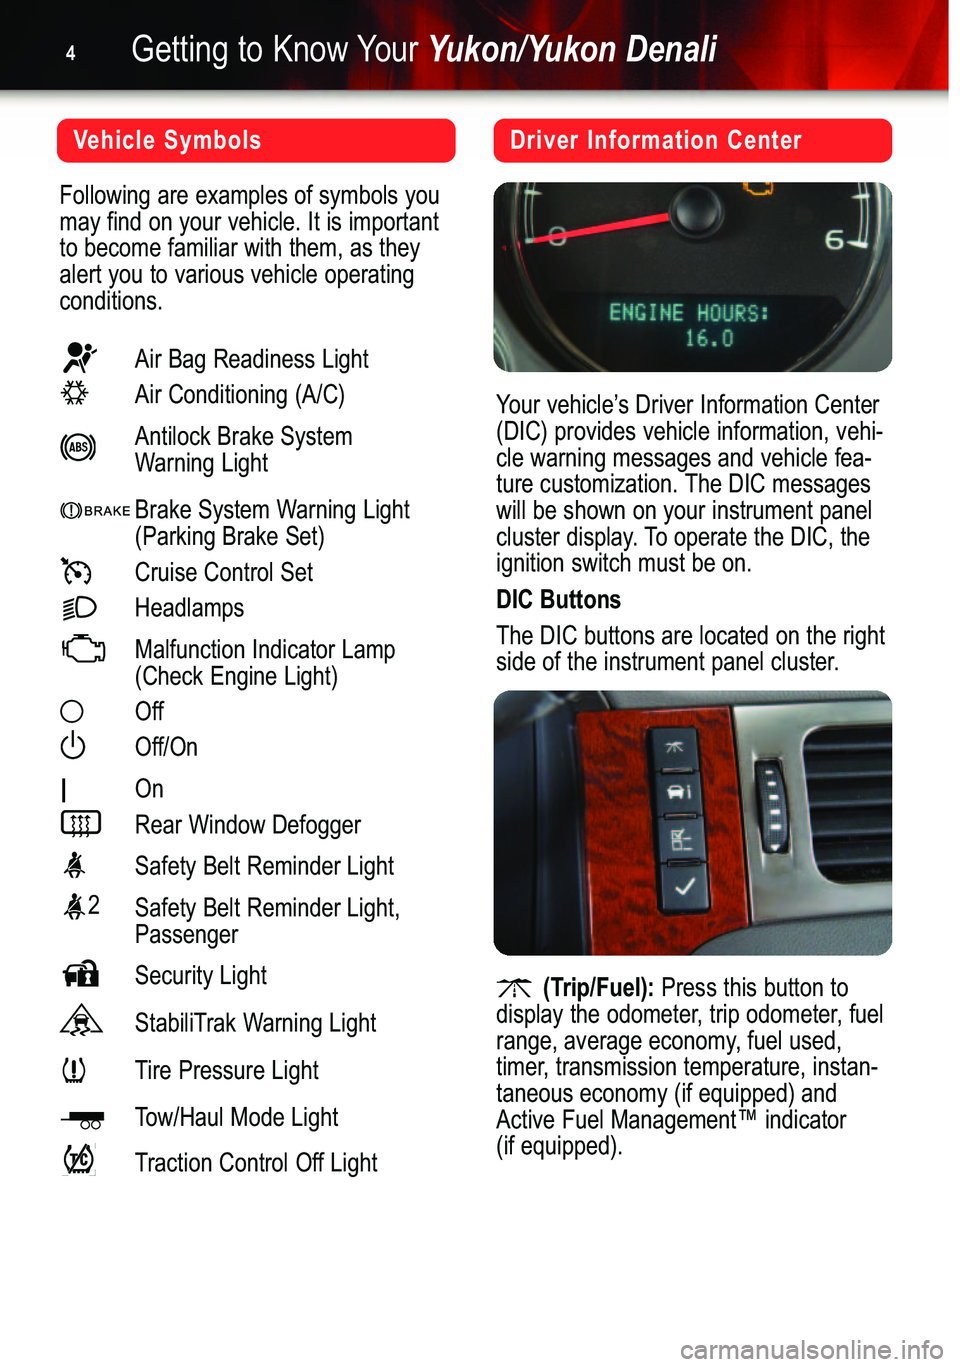 GMC YUKON 2007  Get To Know Guide Getting to Know YourYukon/Yukon Denali4
Vehicle Symbols
Following are examples of symbols you
may find on your vehicle. It is importantto become familiar with them, as theyalert you to various vehicle